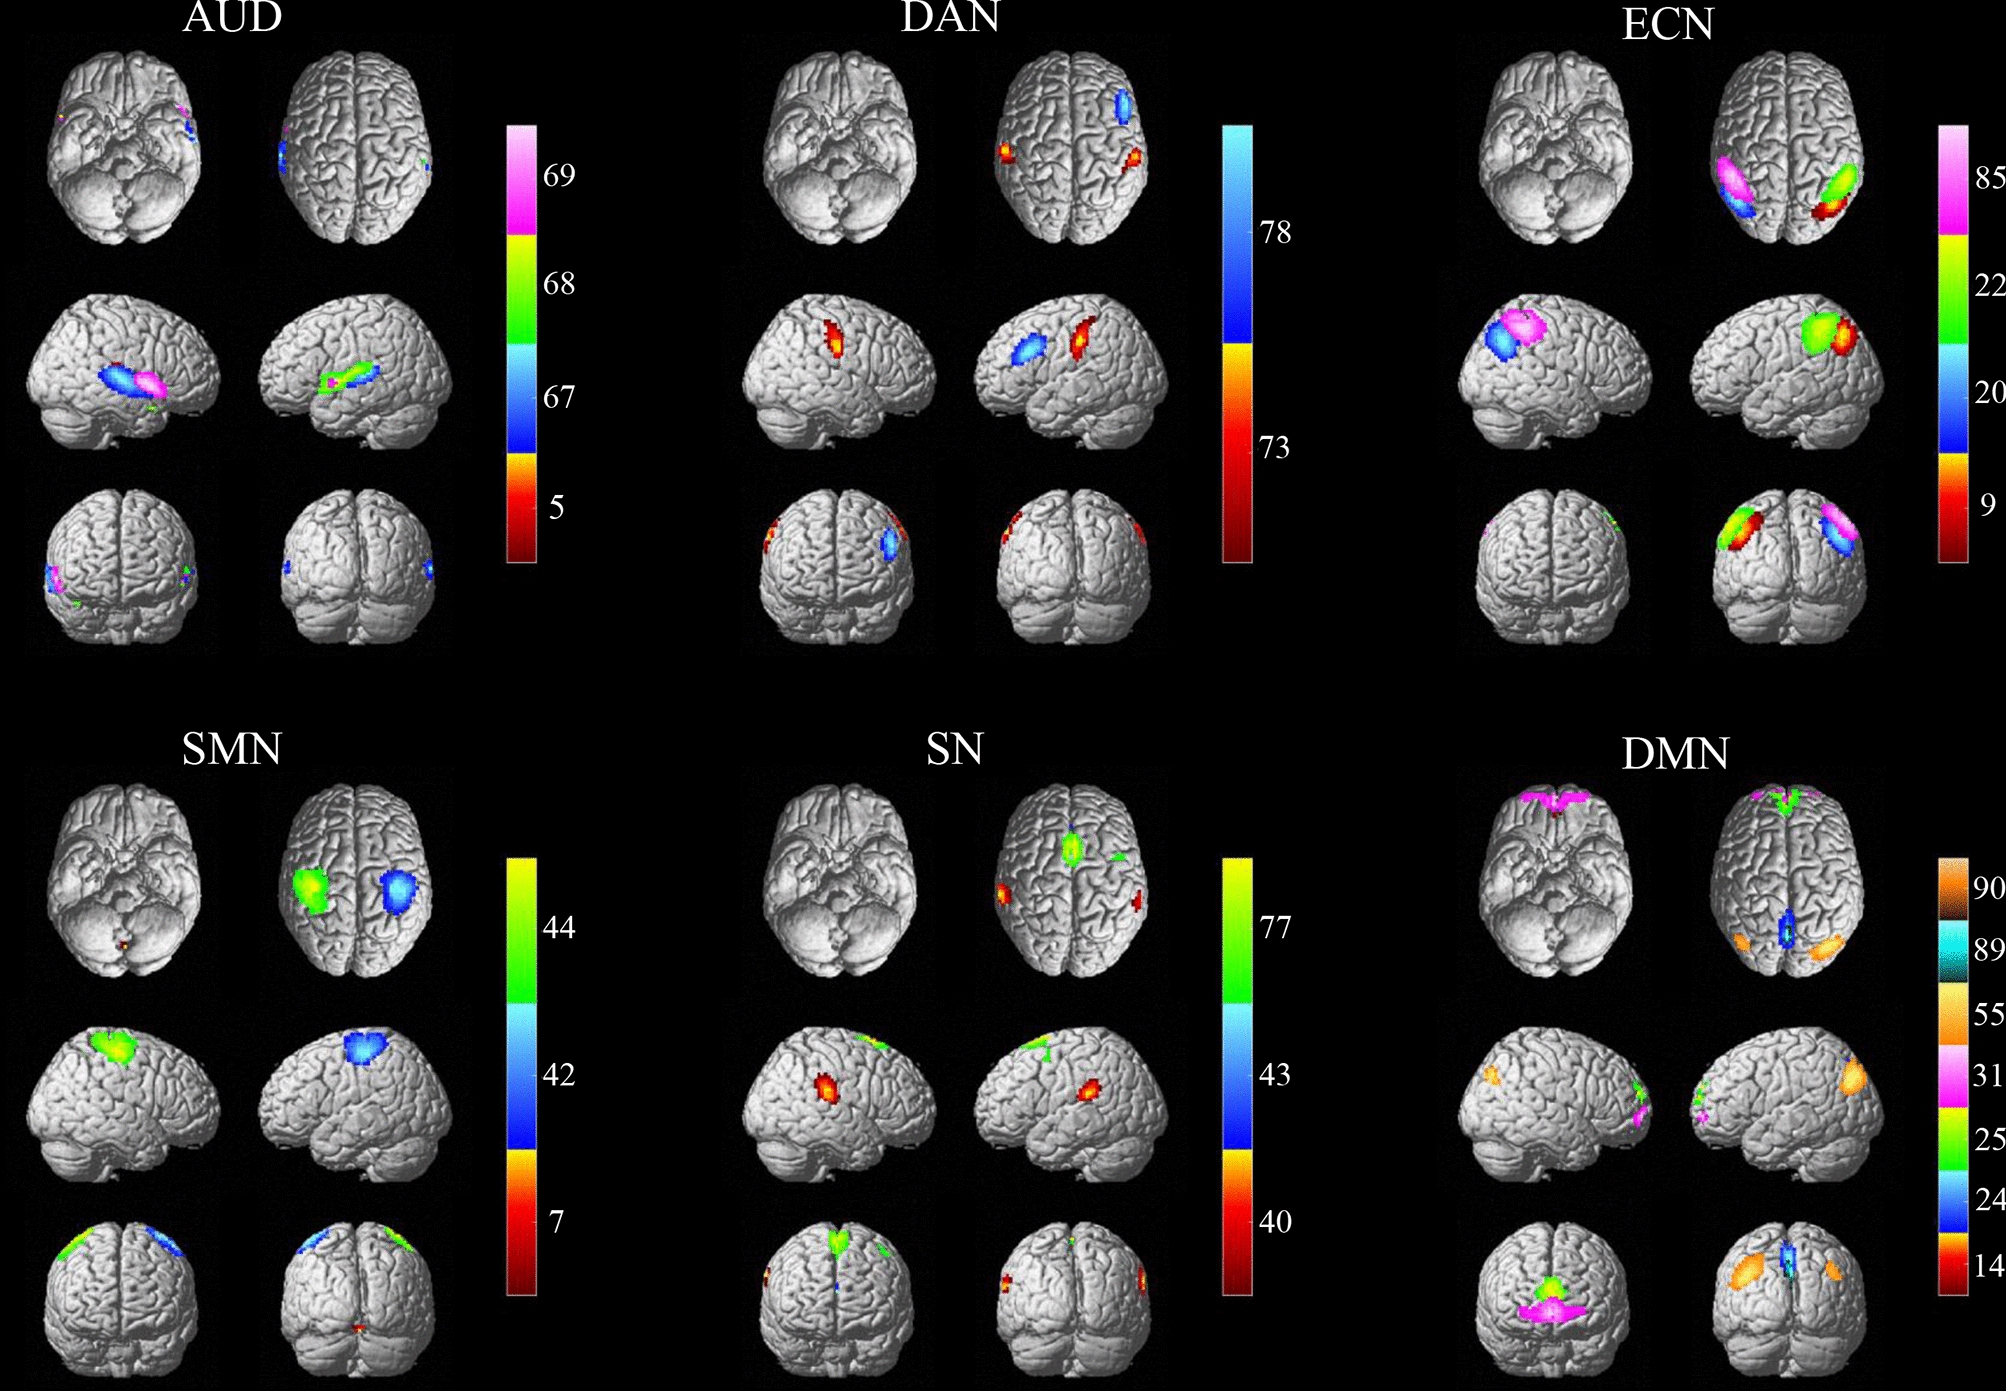 Altered patterns of dynamic functional connectivity of brain networks in deficit and non-deficit schizophrenia